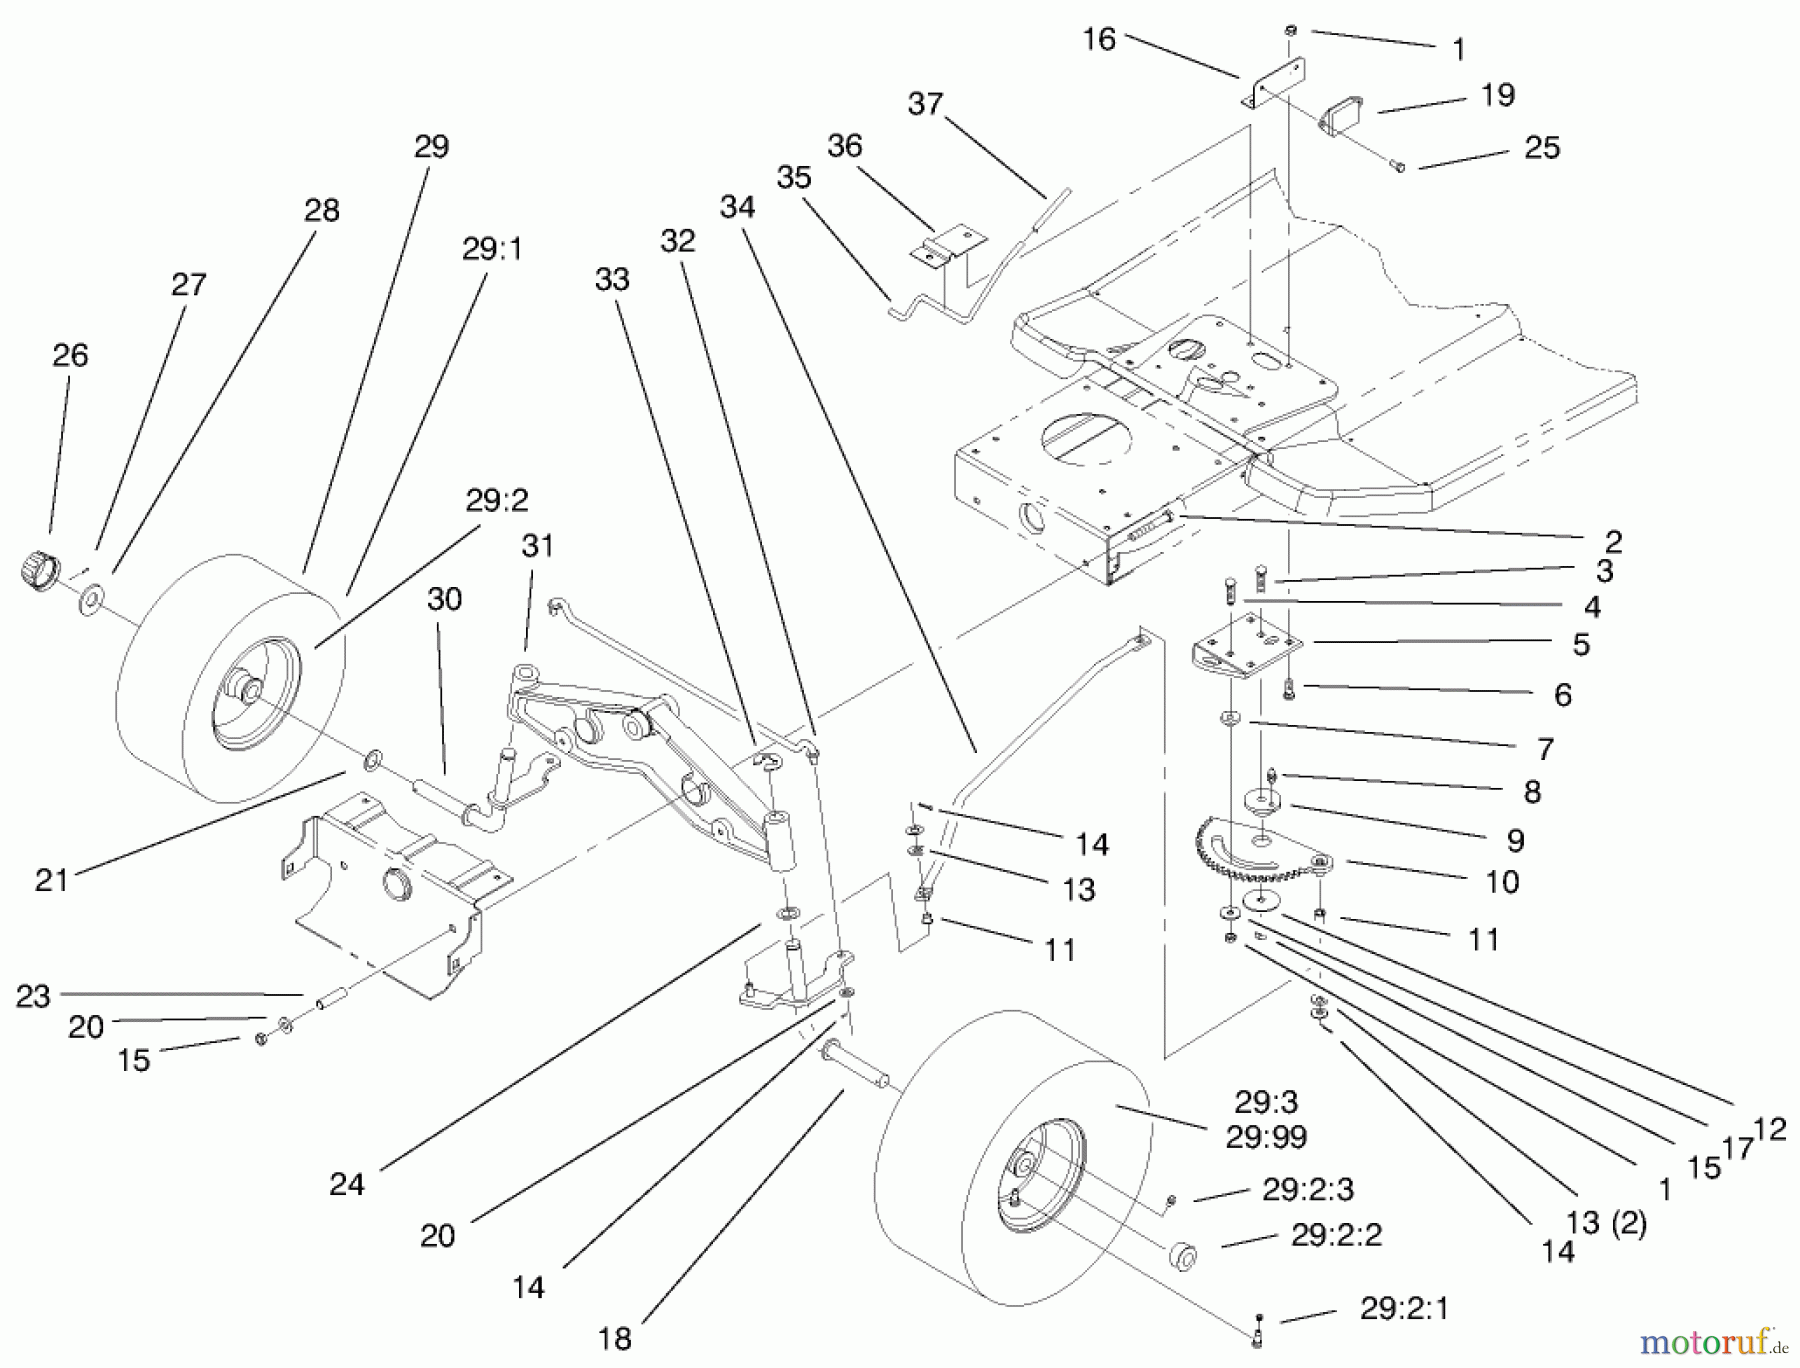  Toro Neu Mowers, Lawn & Garden Tractor Seite 1 71226 (16-38XLE) - Toro 16-38XLE Lawn Tractor, 2000 (200000001-200999999) STEERING COMPONENTS ASSEMBLY